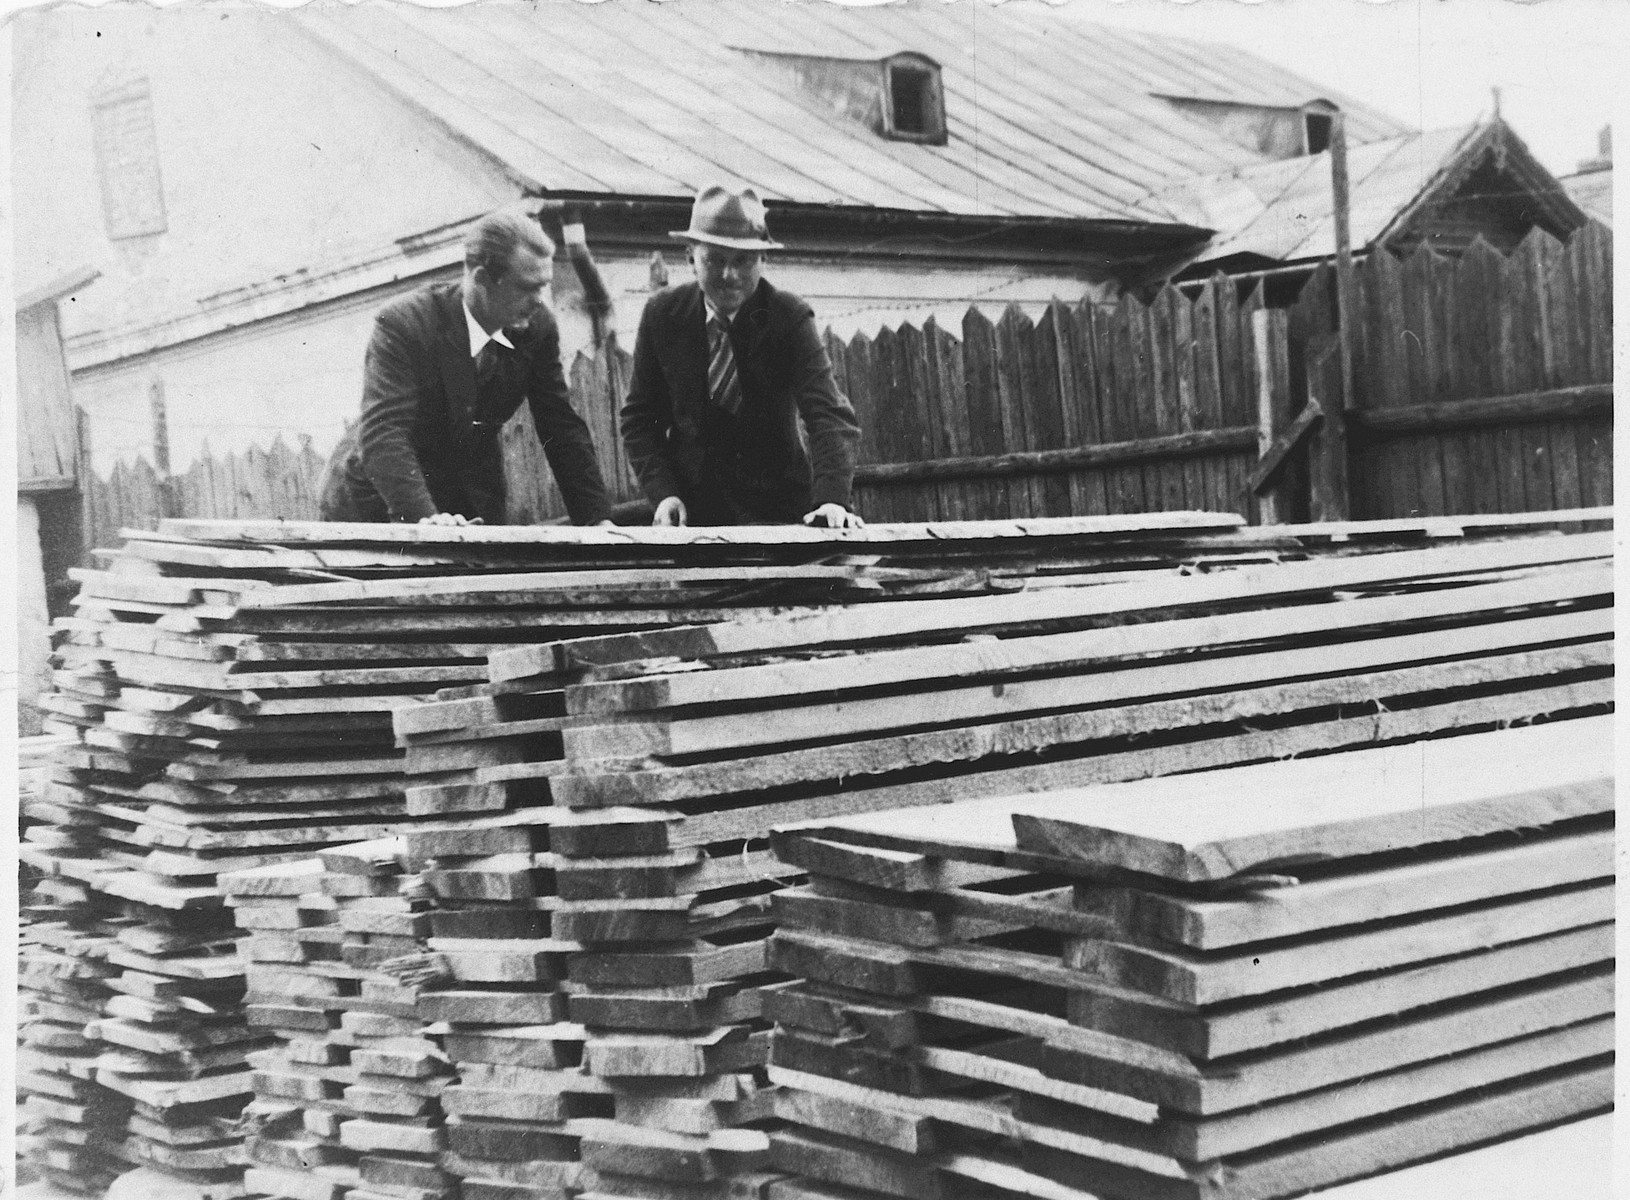 A Jewish lumber merchant talks to a customer in the family lumberyard in Rzeszow, Poland. 

Among those pictured is Aron Jam (right).